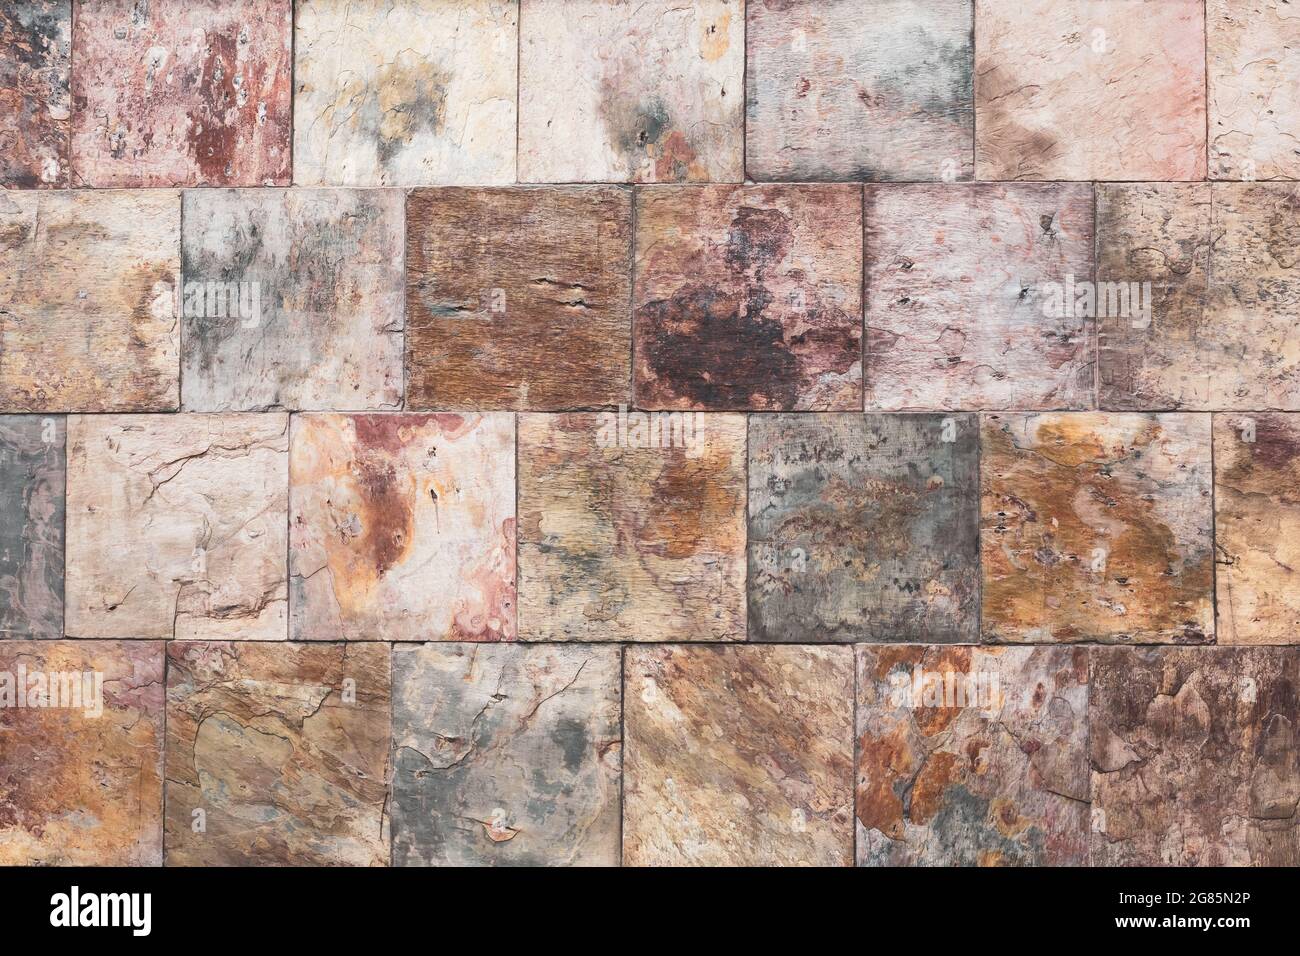 Brown old stone wall, vintage texture, bricks surface, abstract grunge background, square tile pattern, rough granite. Buildings facade. Textured rock Stock Photo